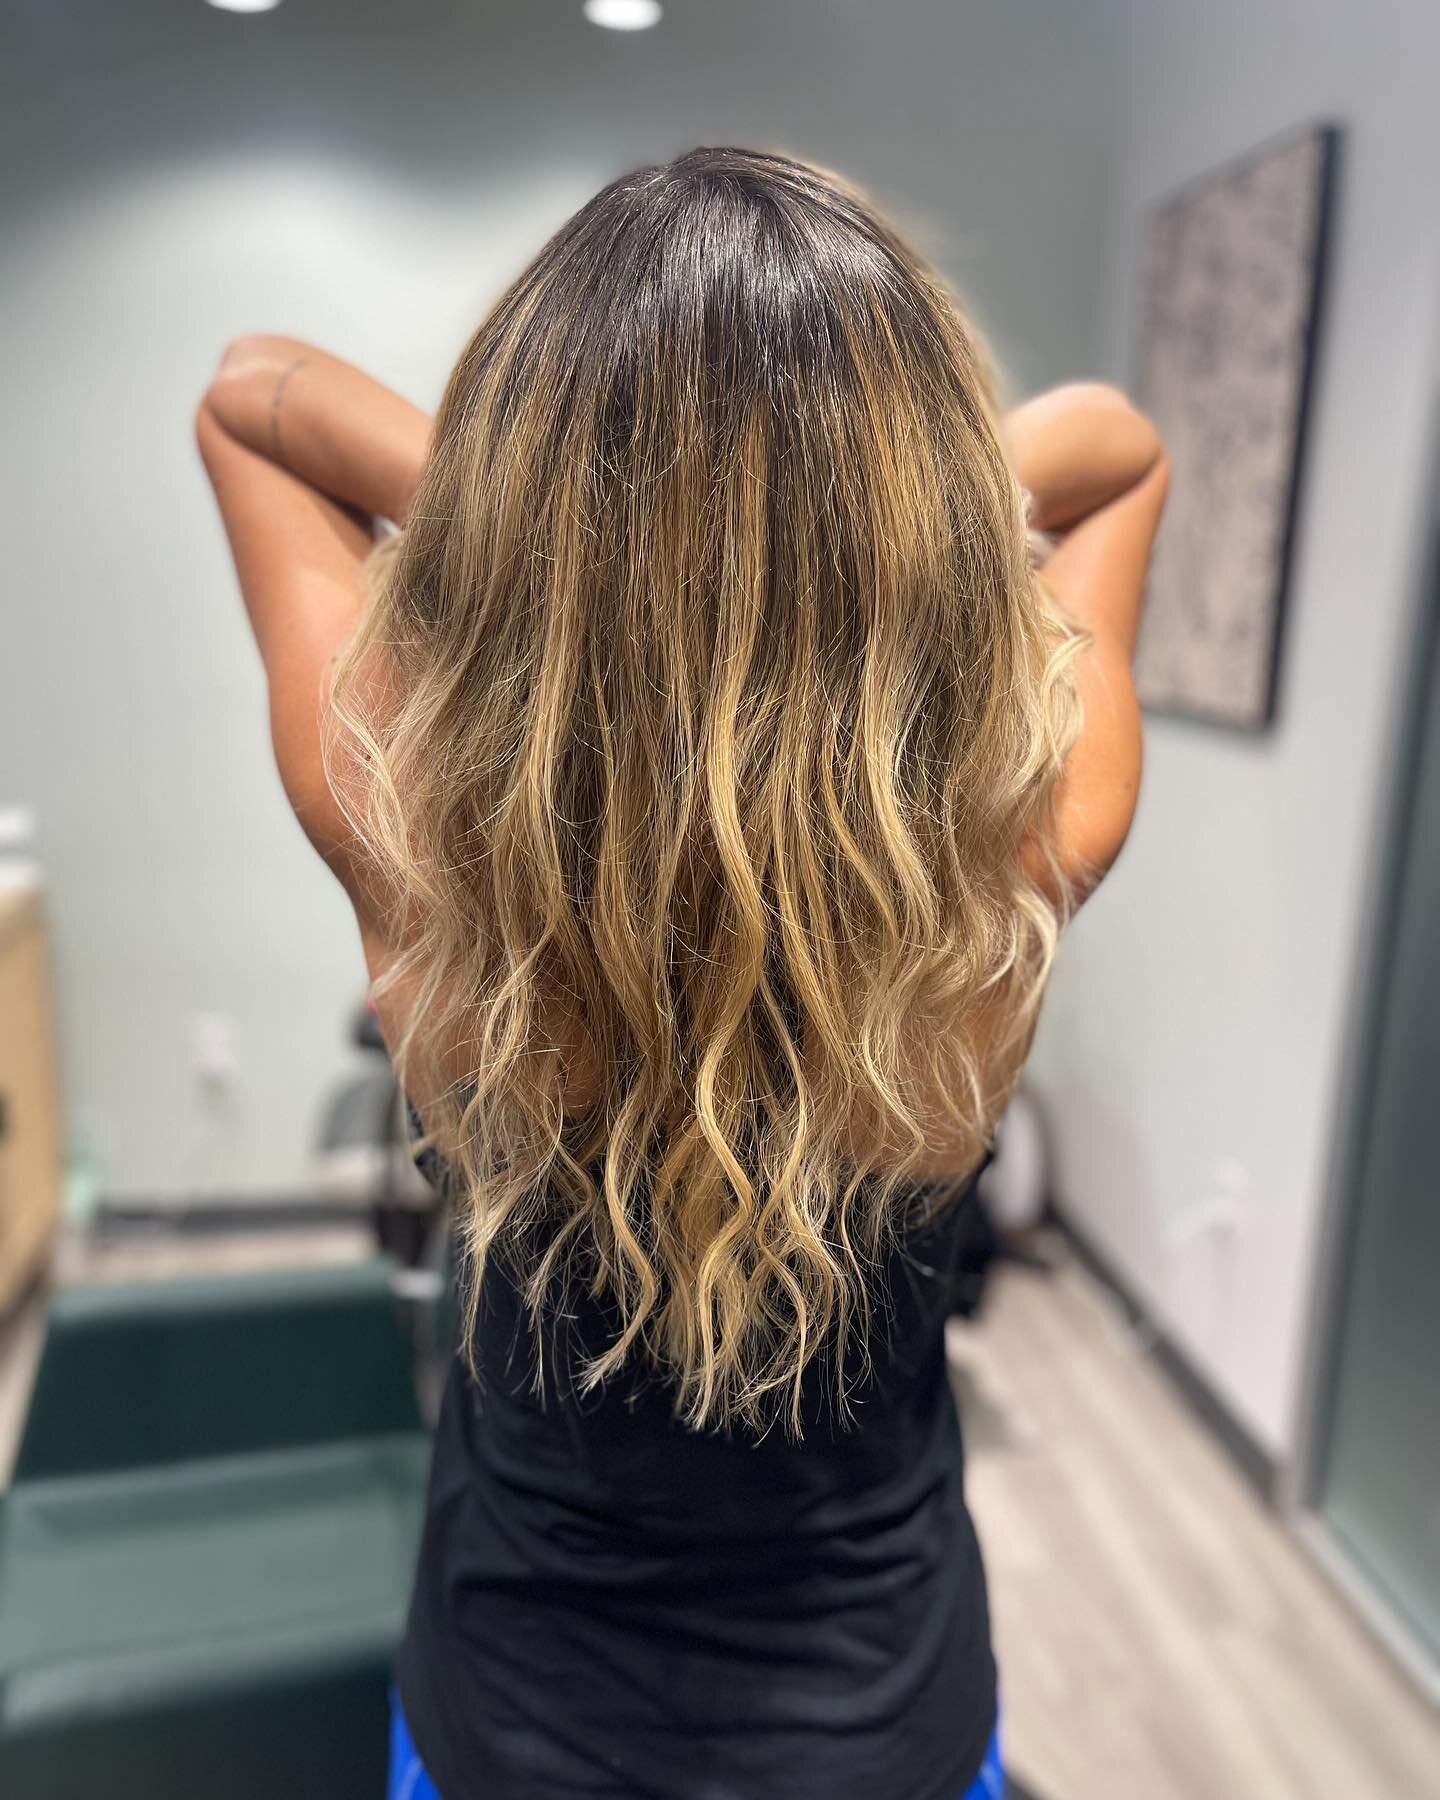 I still color hair, everyone! ‼️🤗
&zwnj;
With this busy wedding season, I haven&rsquo;t posted much on my salon life these days! Coloring hair has always been a love of mine. Check out this transformation from last week. We cut about 4 inches off, r